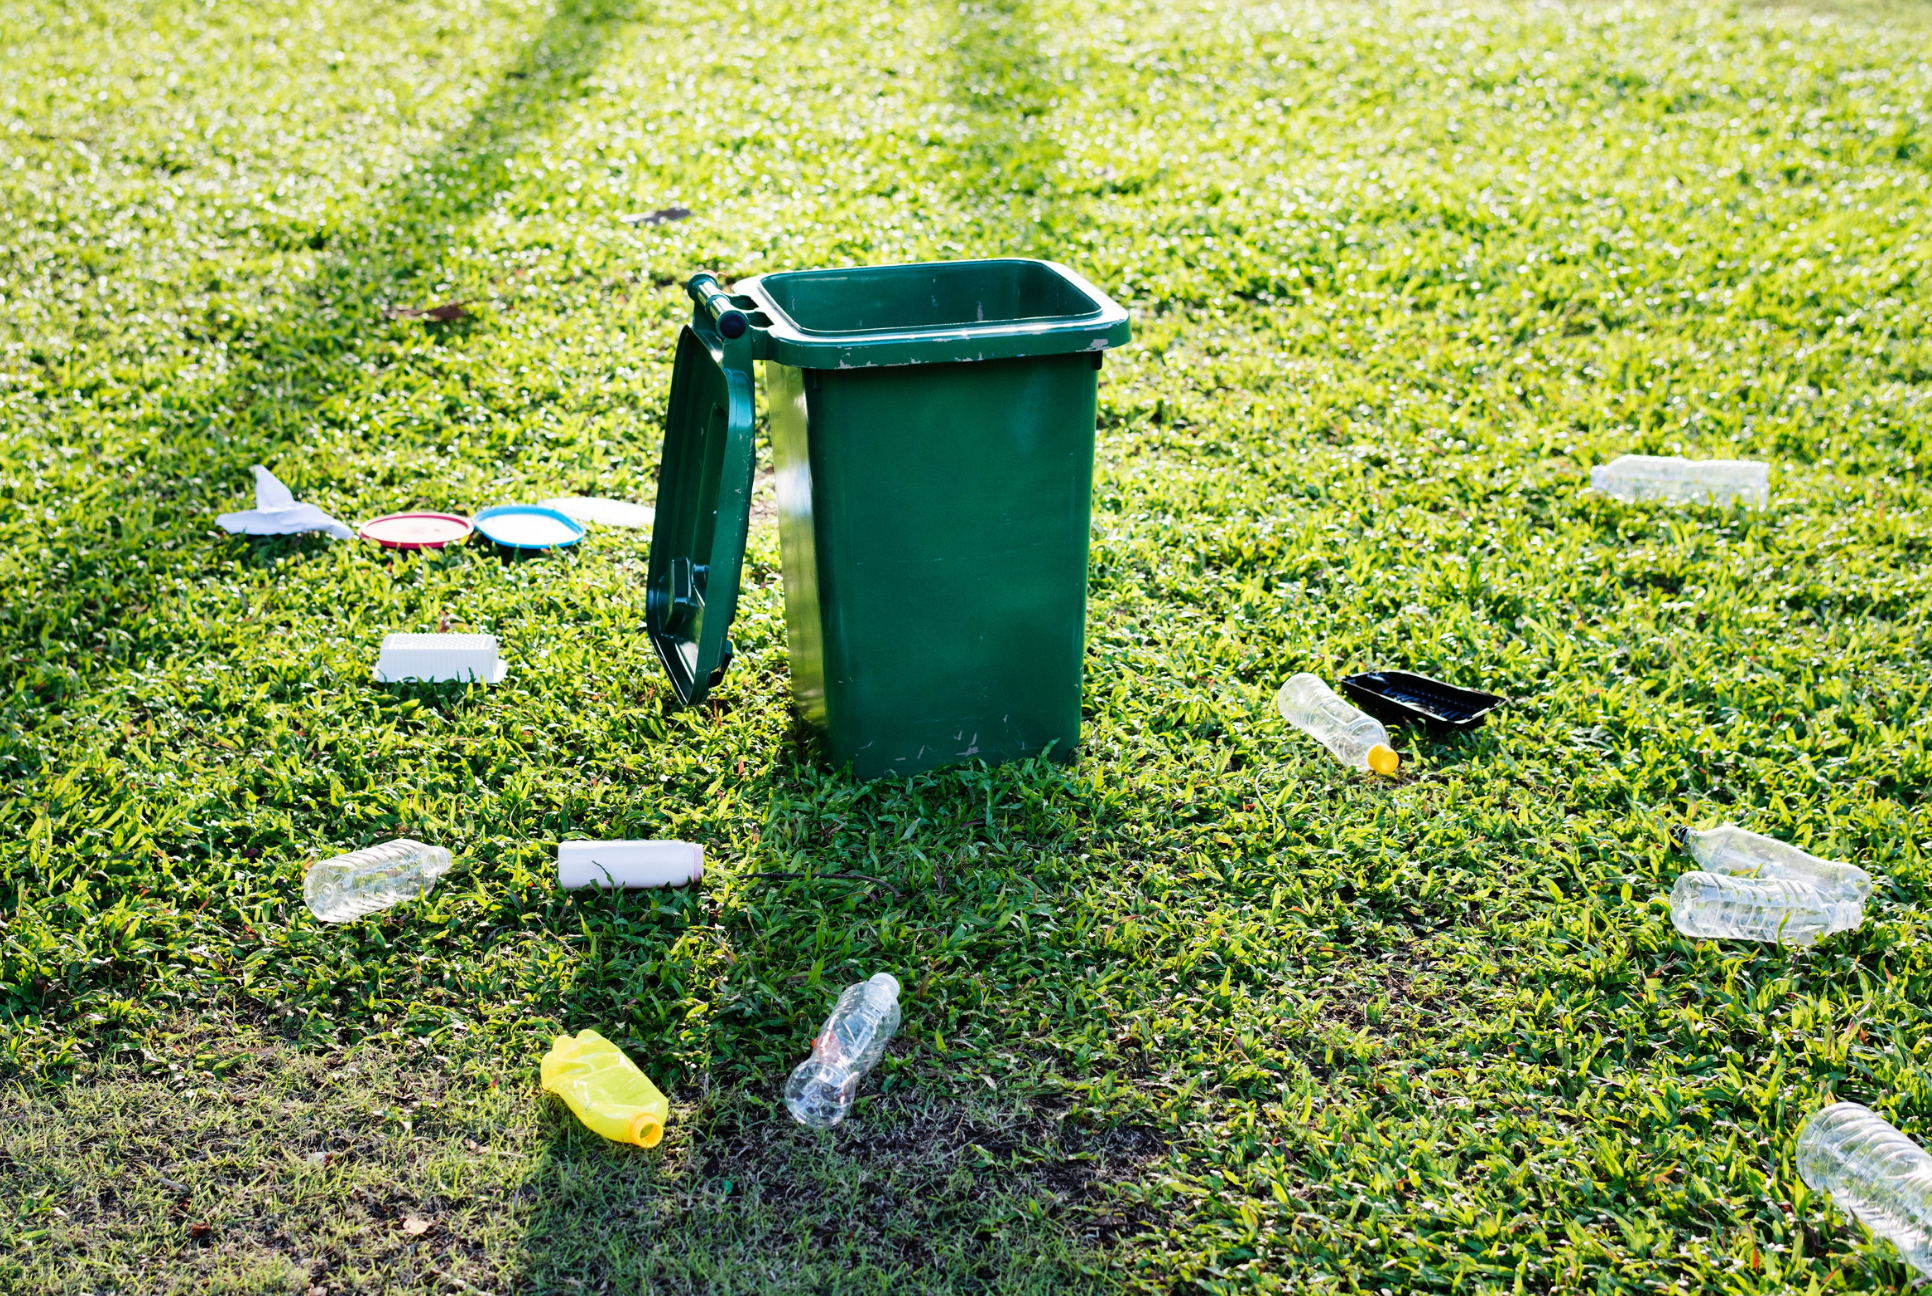 recycle bin and recyclables in grass around bin